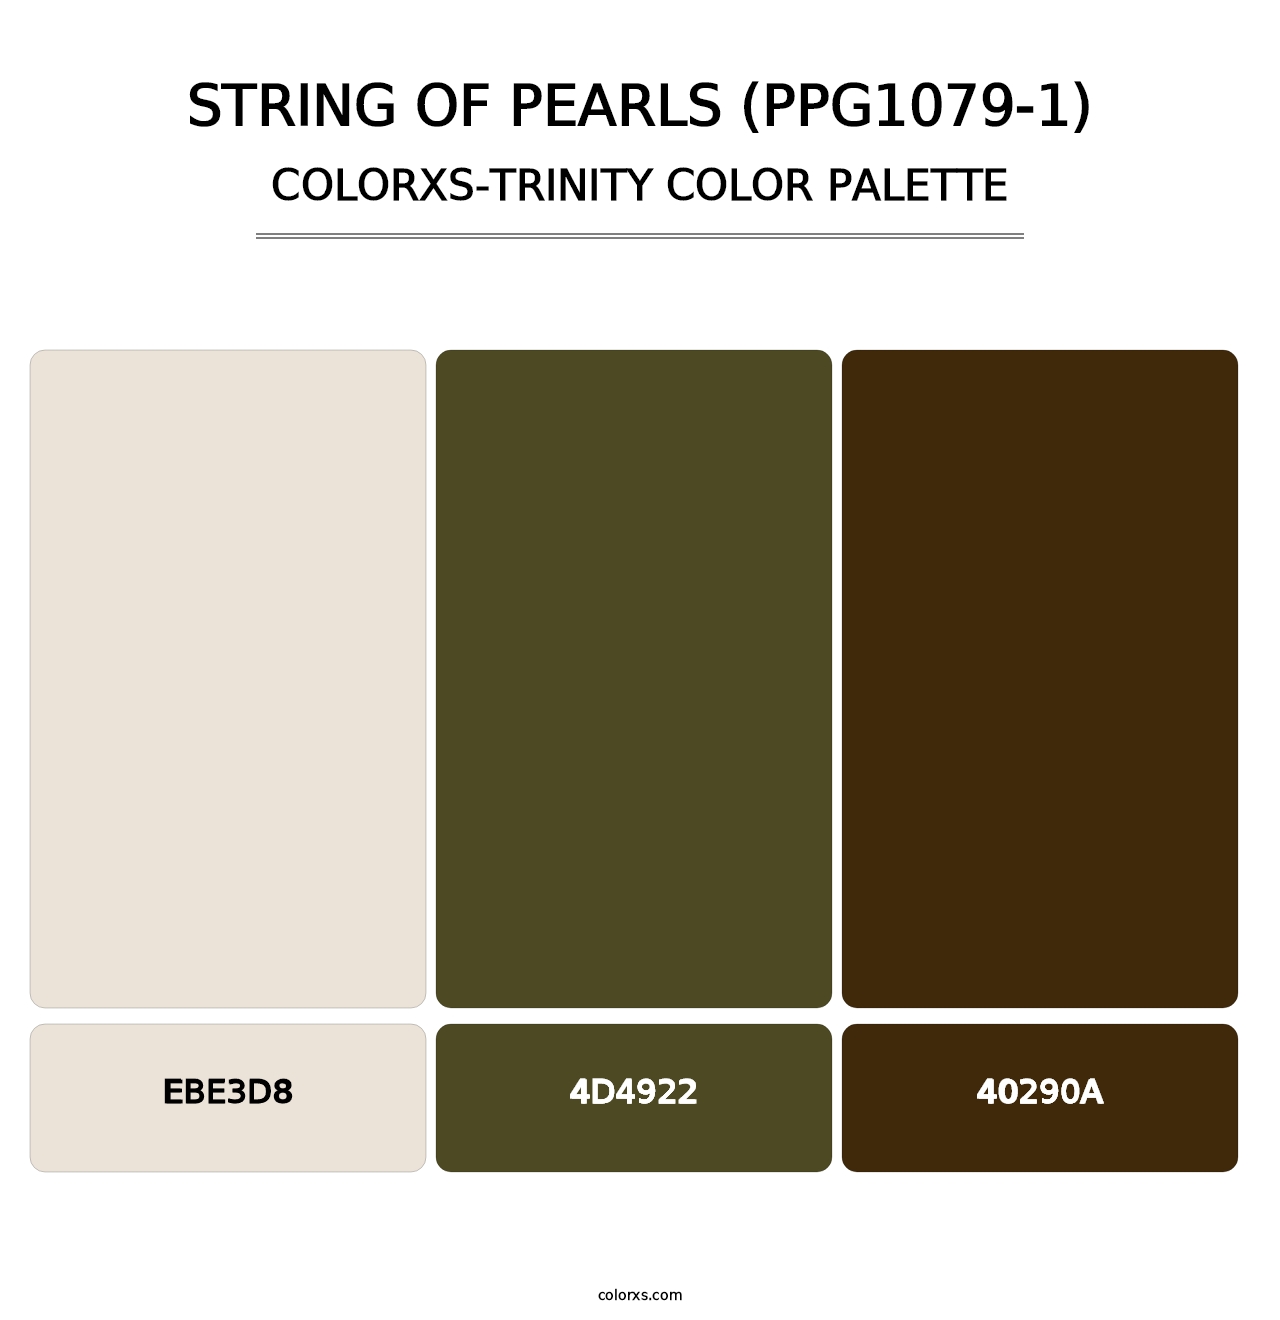 String Of Pearls (PPG1079-1) - Colorxs Trinity Palette